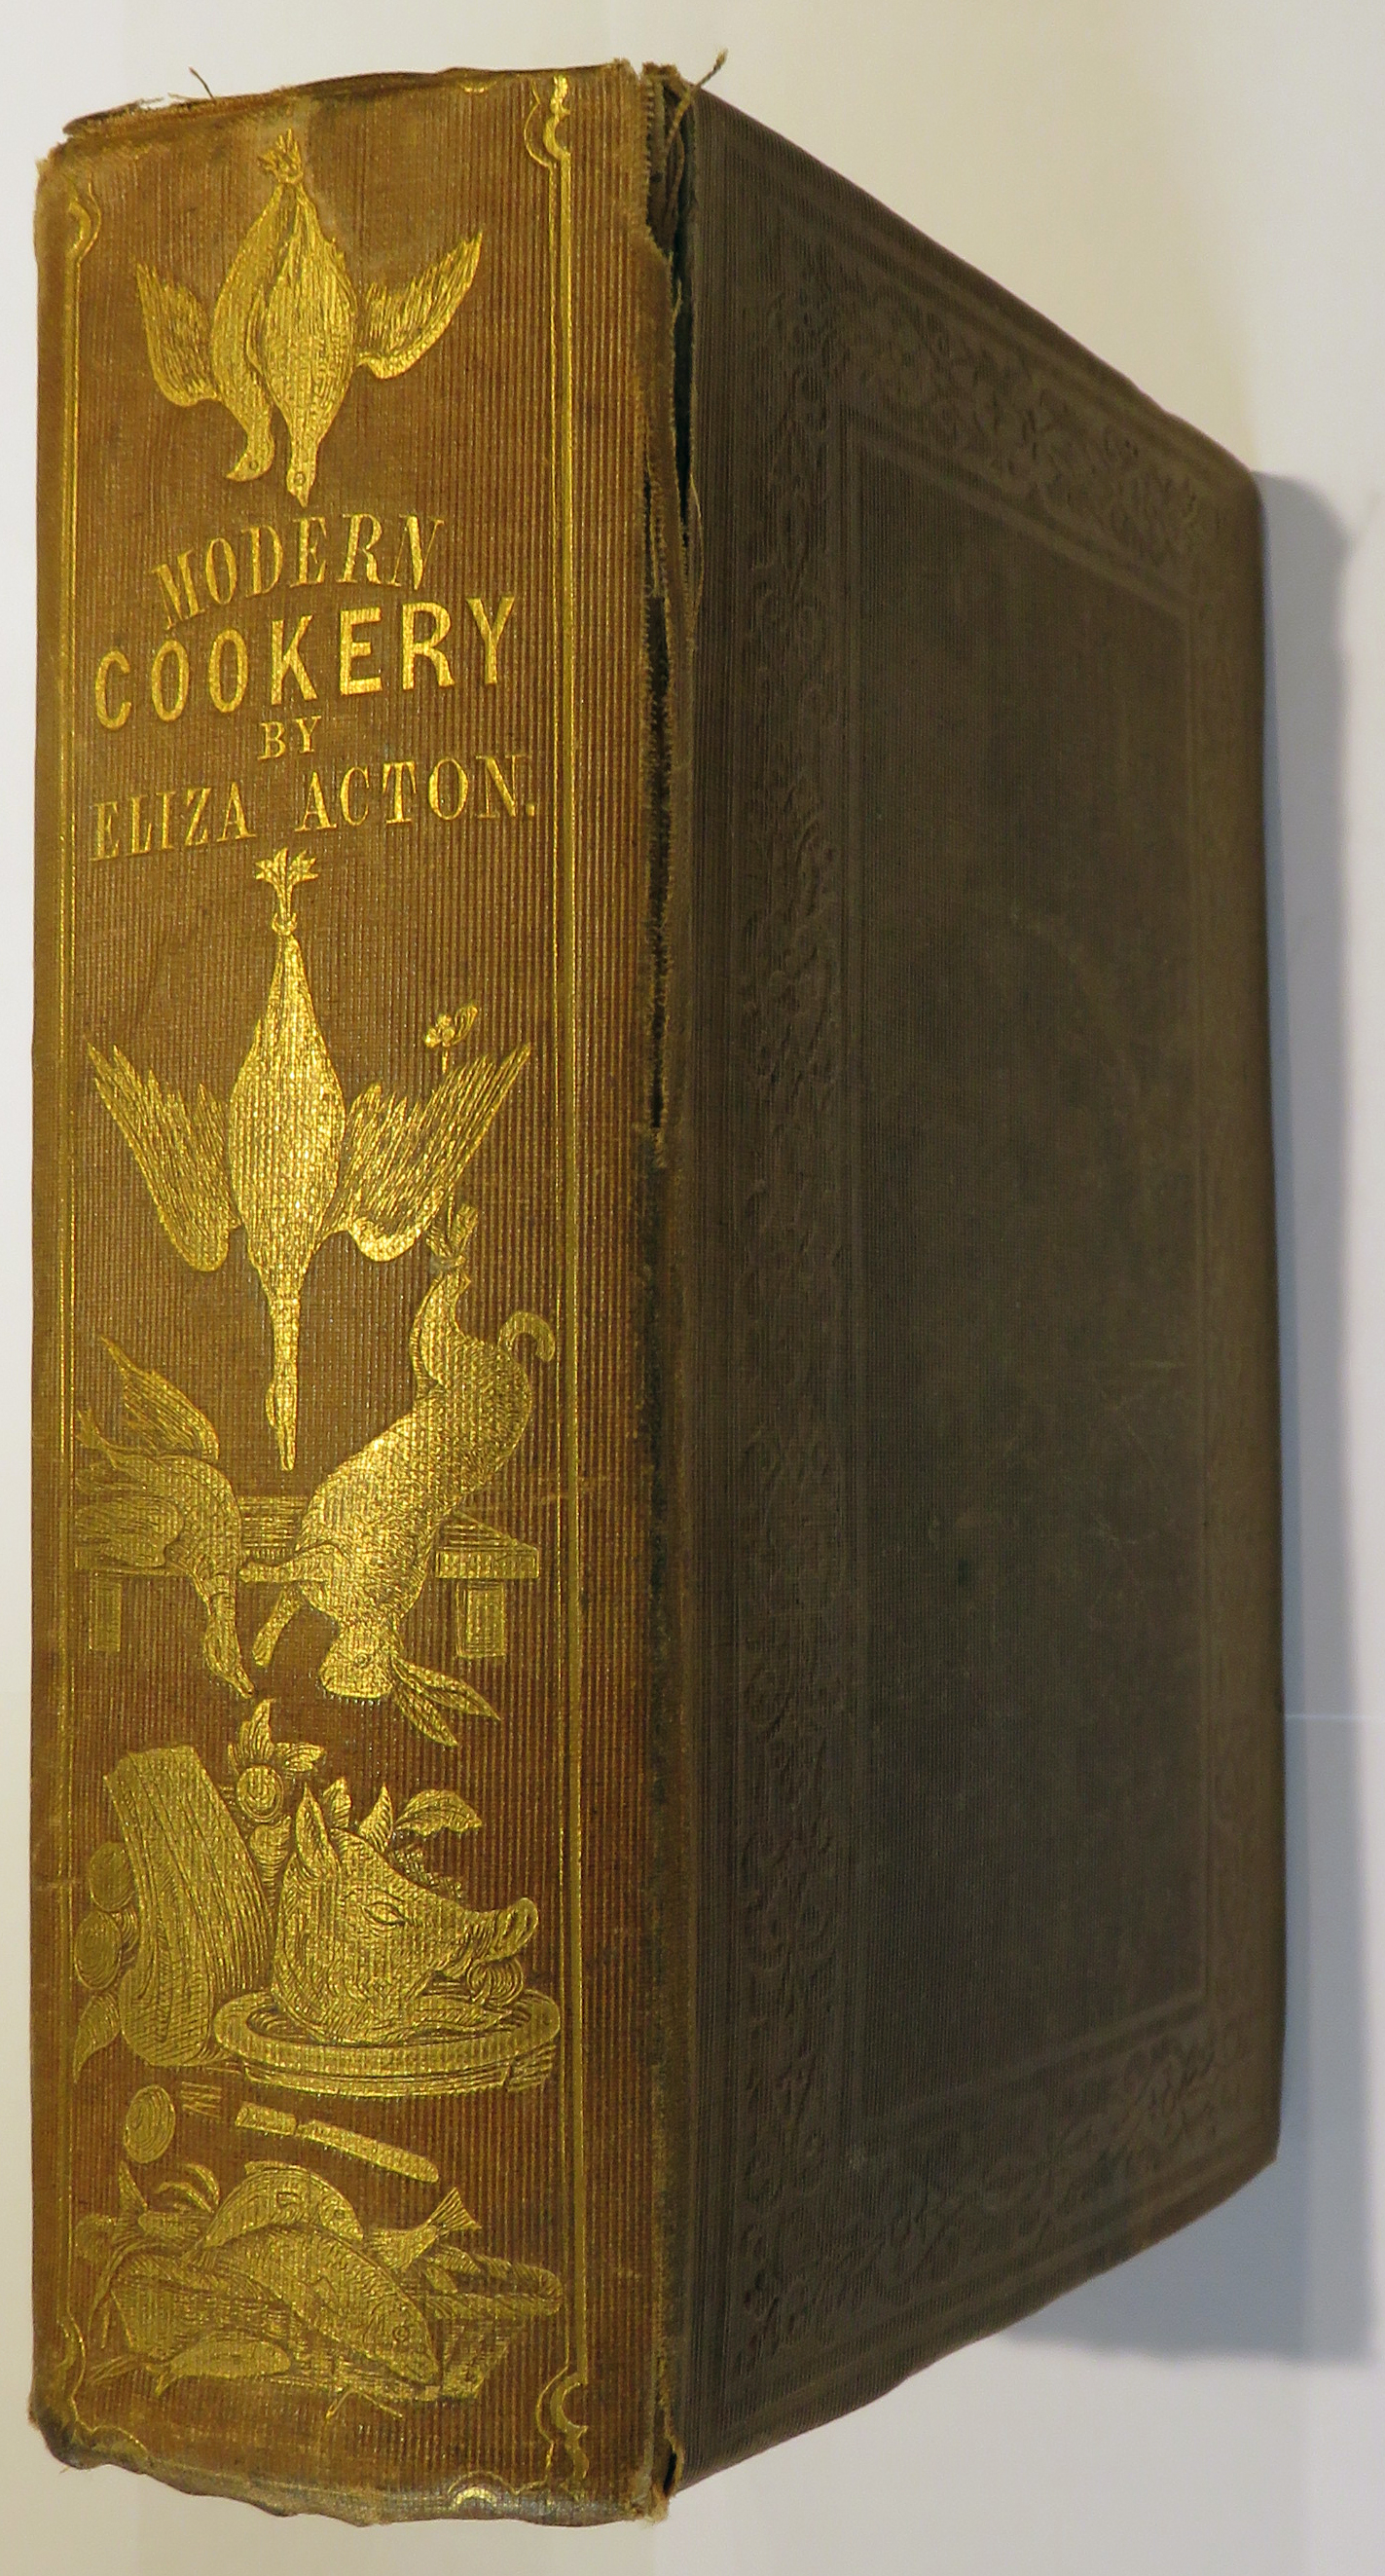 Modern Cookery In All Its Branches; Reduced To A System of Easy Practice, For The Use Of Private Families. In A Series Of Practical, Which Have Been Strictly Tested, And Are Given With The Most Minute Exactness.